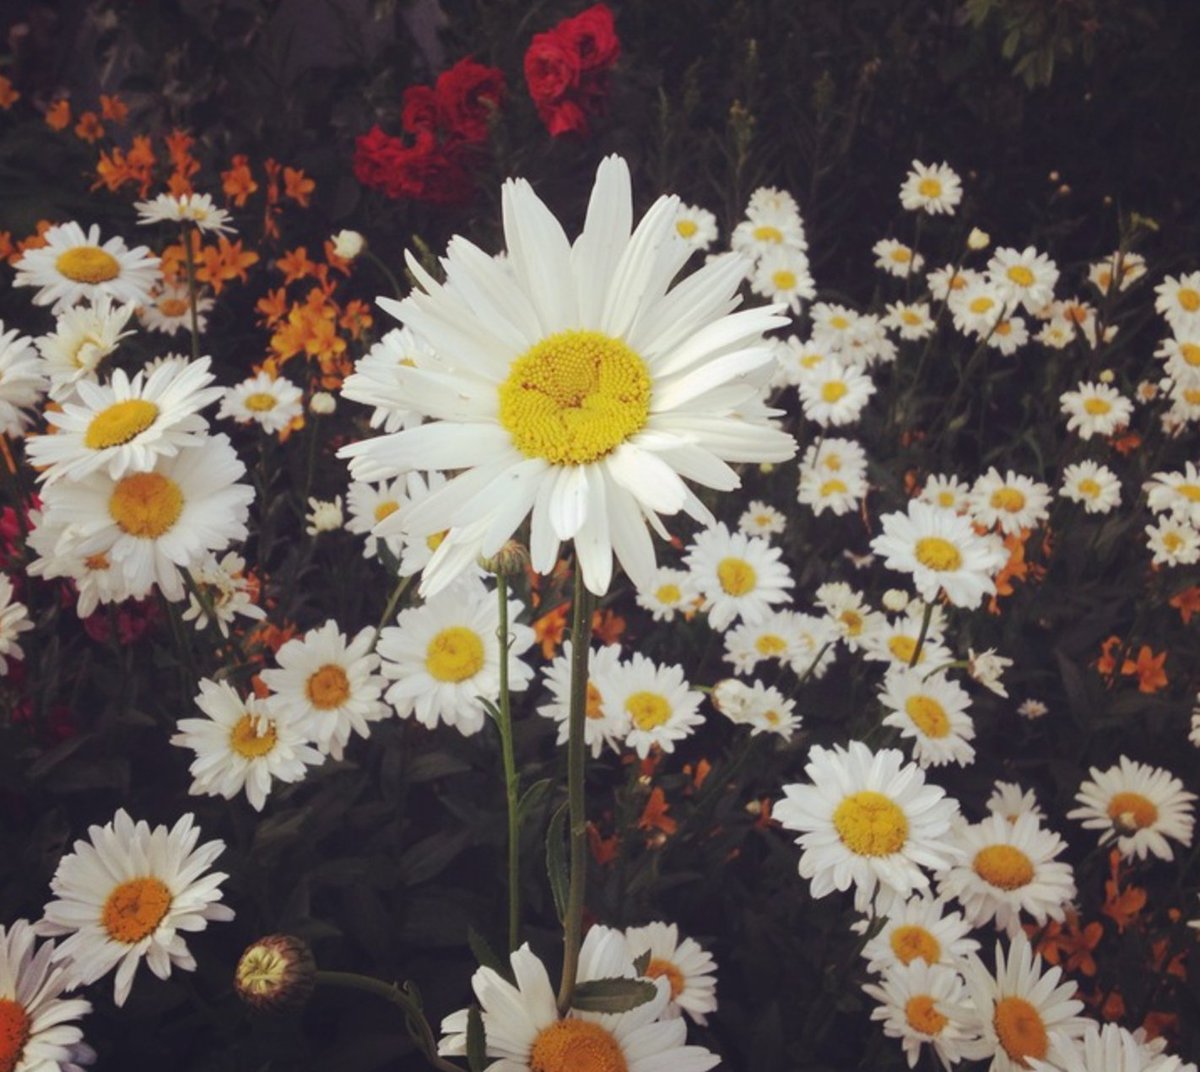 Take a photo of a flower (or two, or three, or more) and post here — https://t.co/S5sb6BCEXh https://t.co/oGNlNe3Zbt